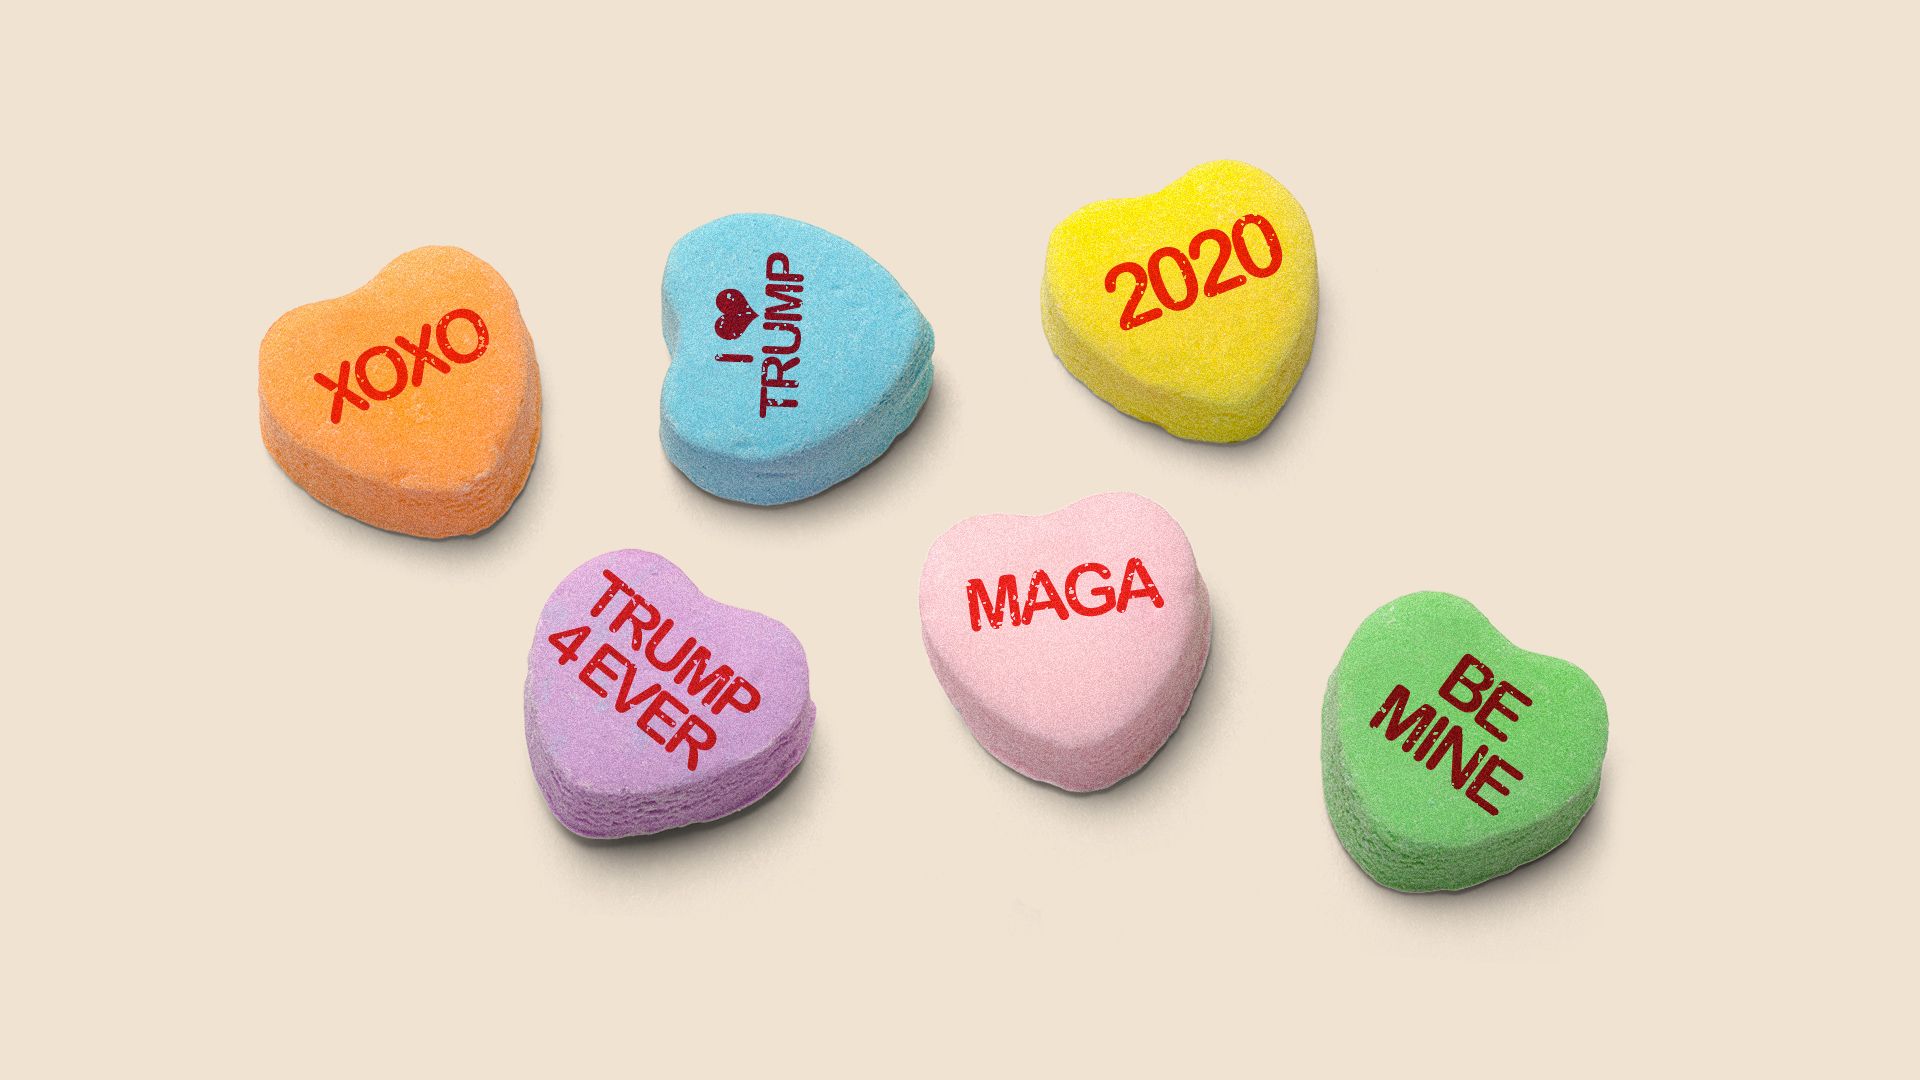 Illustration of valentines heart candies with messages written on them, like TRUMP 4 EVER, MAGA and I HEART TRUMP